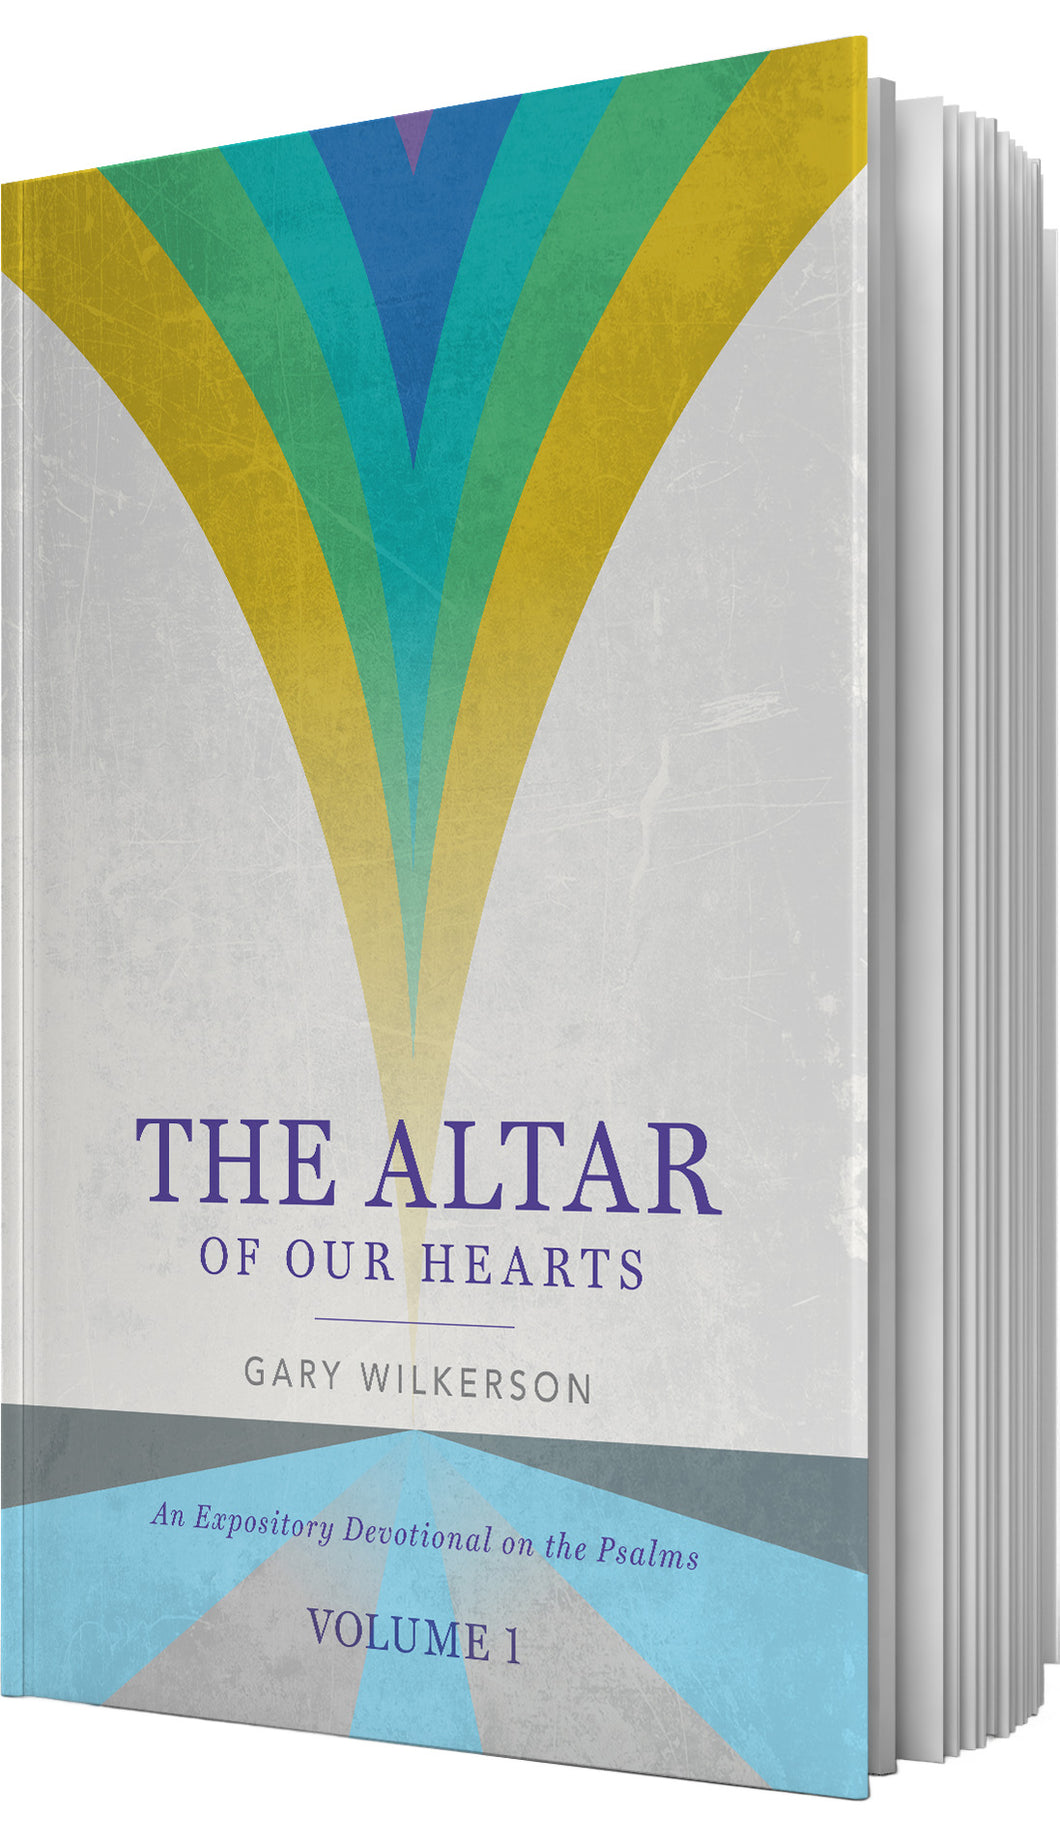 Psalms – The Altar of Our Hearts